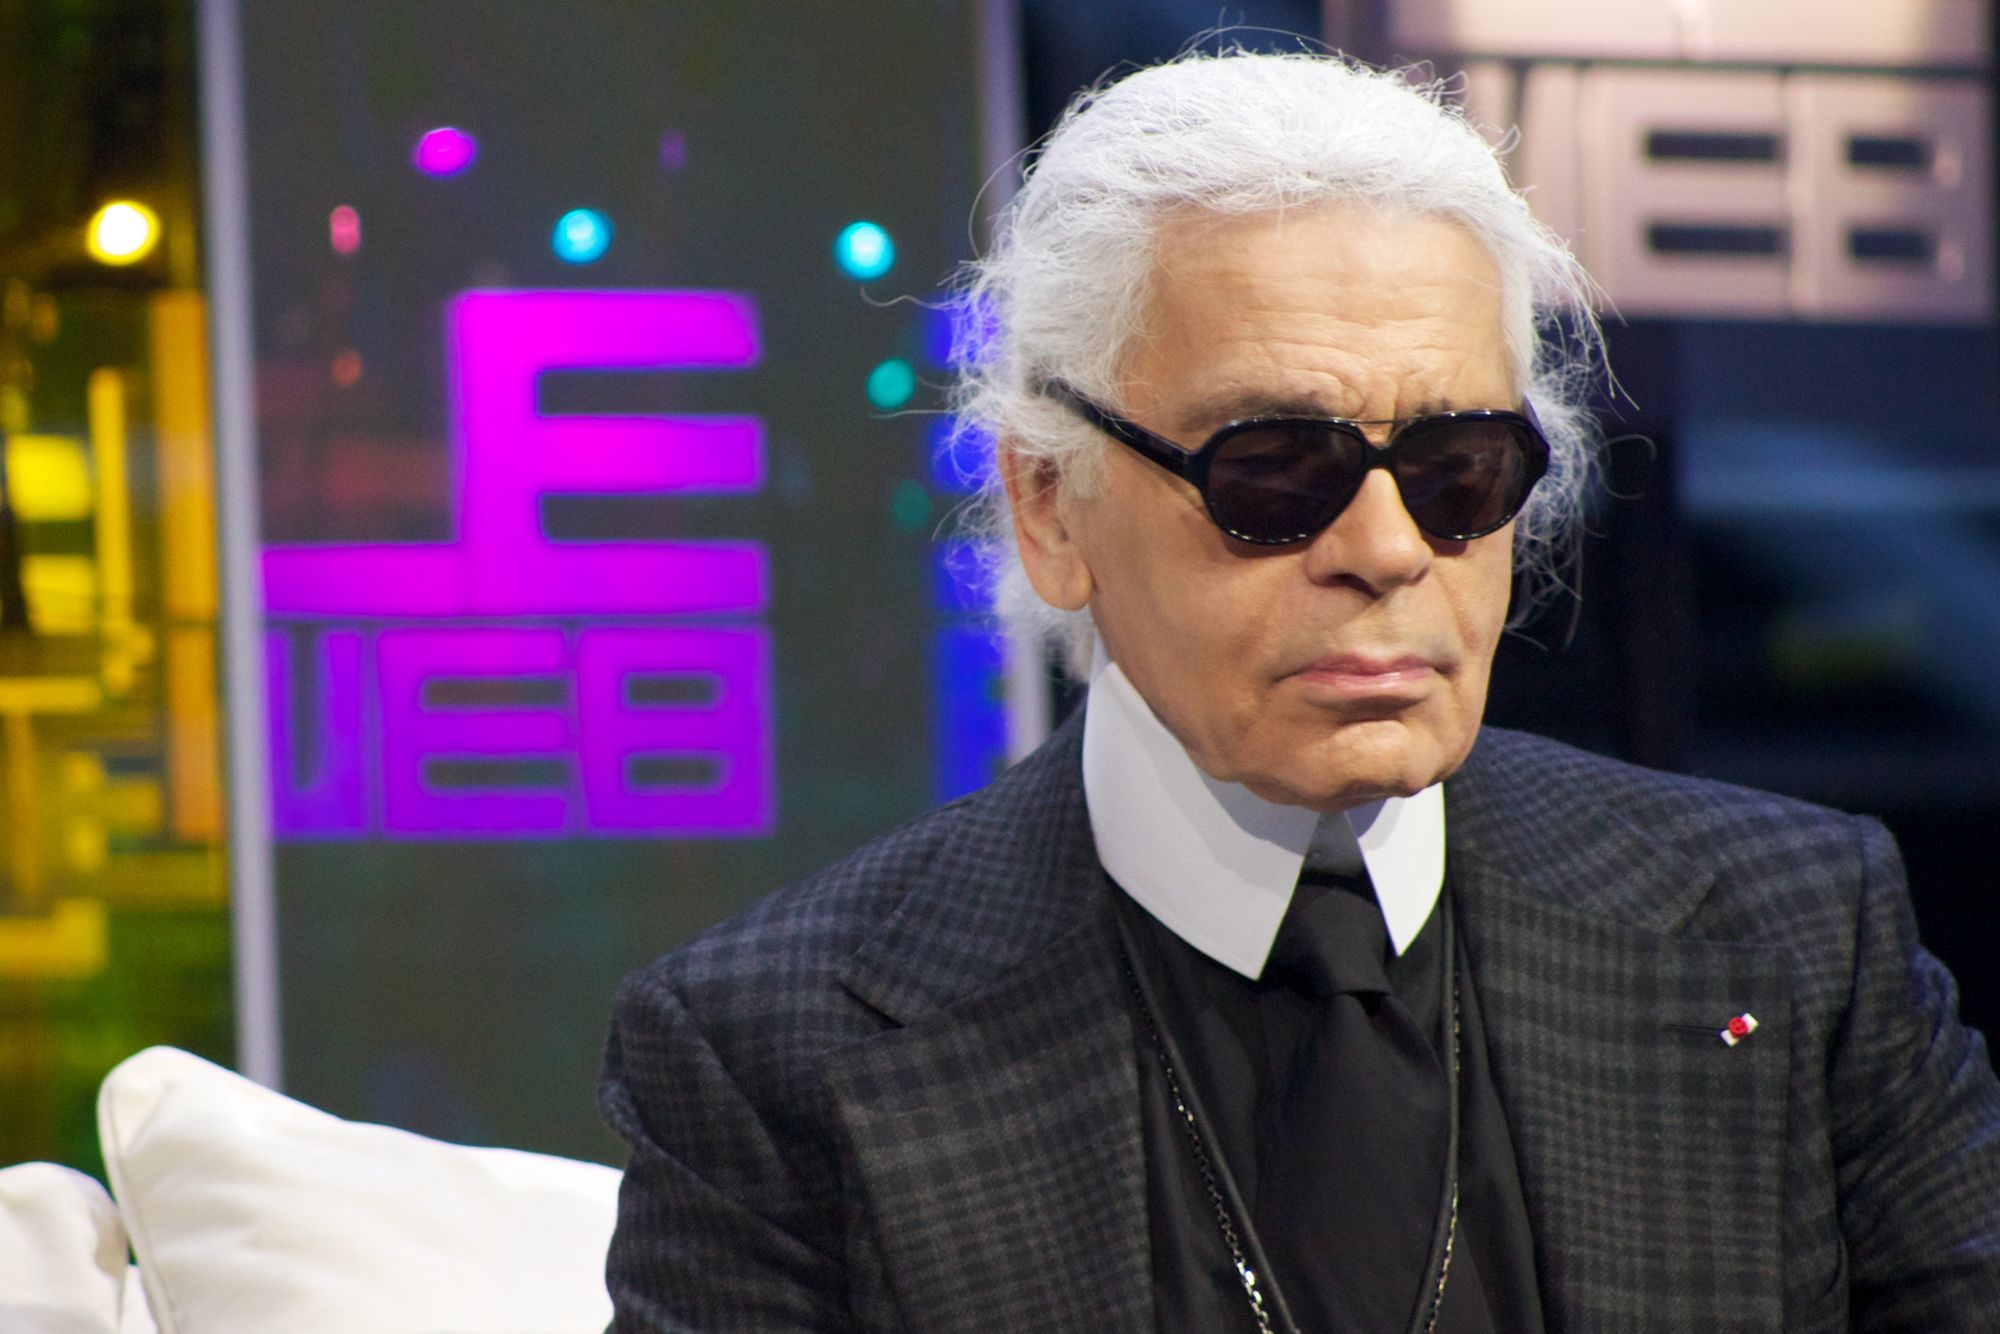 Le Web: Karl Lagerfeld on iPads and technology